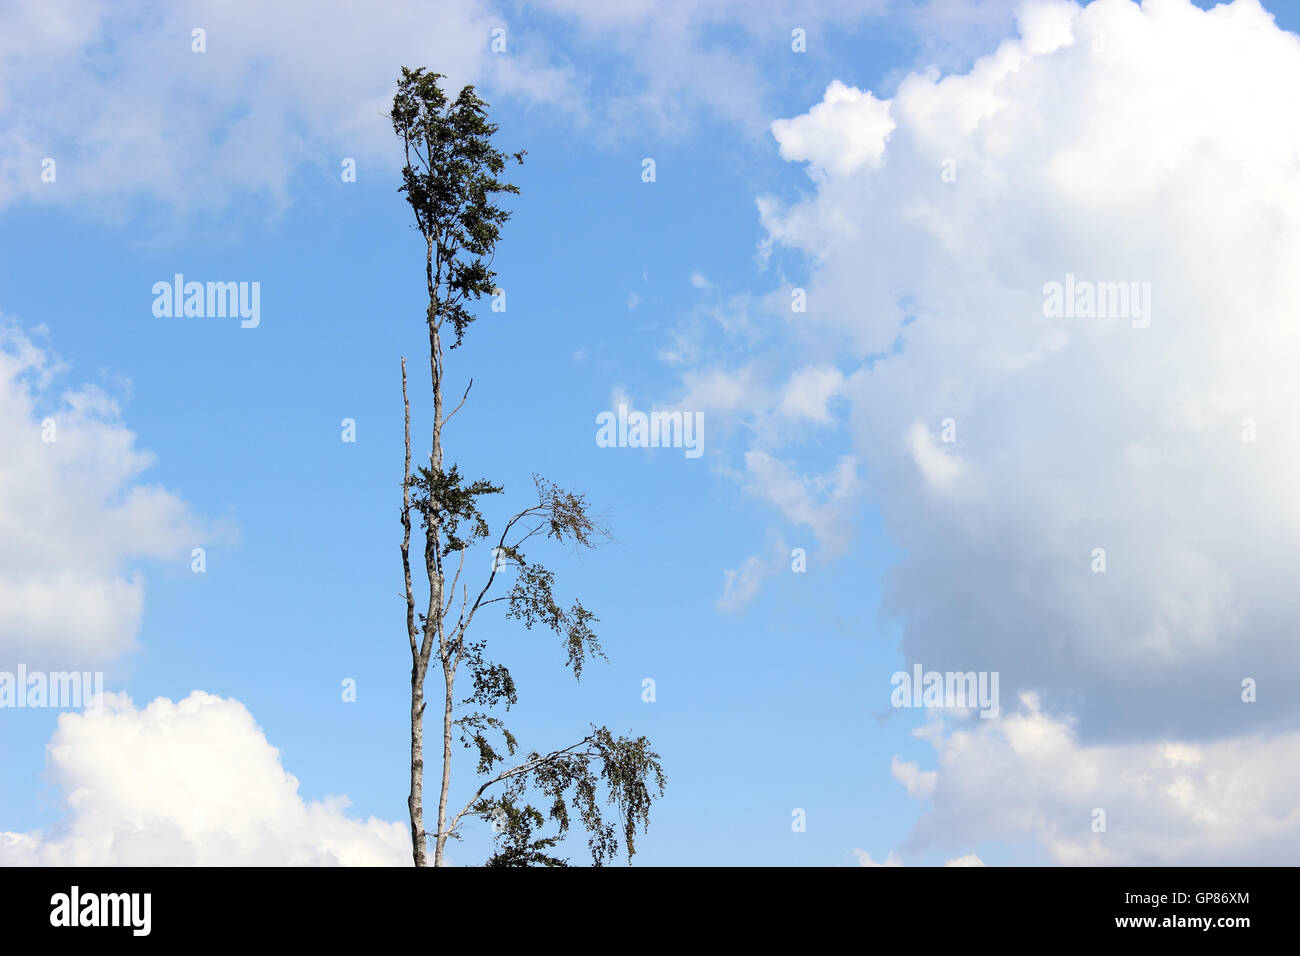 Minimalist lonely thin tree with partly cloudy sky in background. Stock Photo